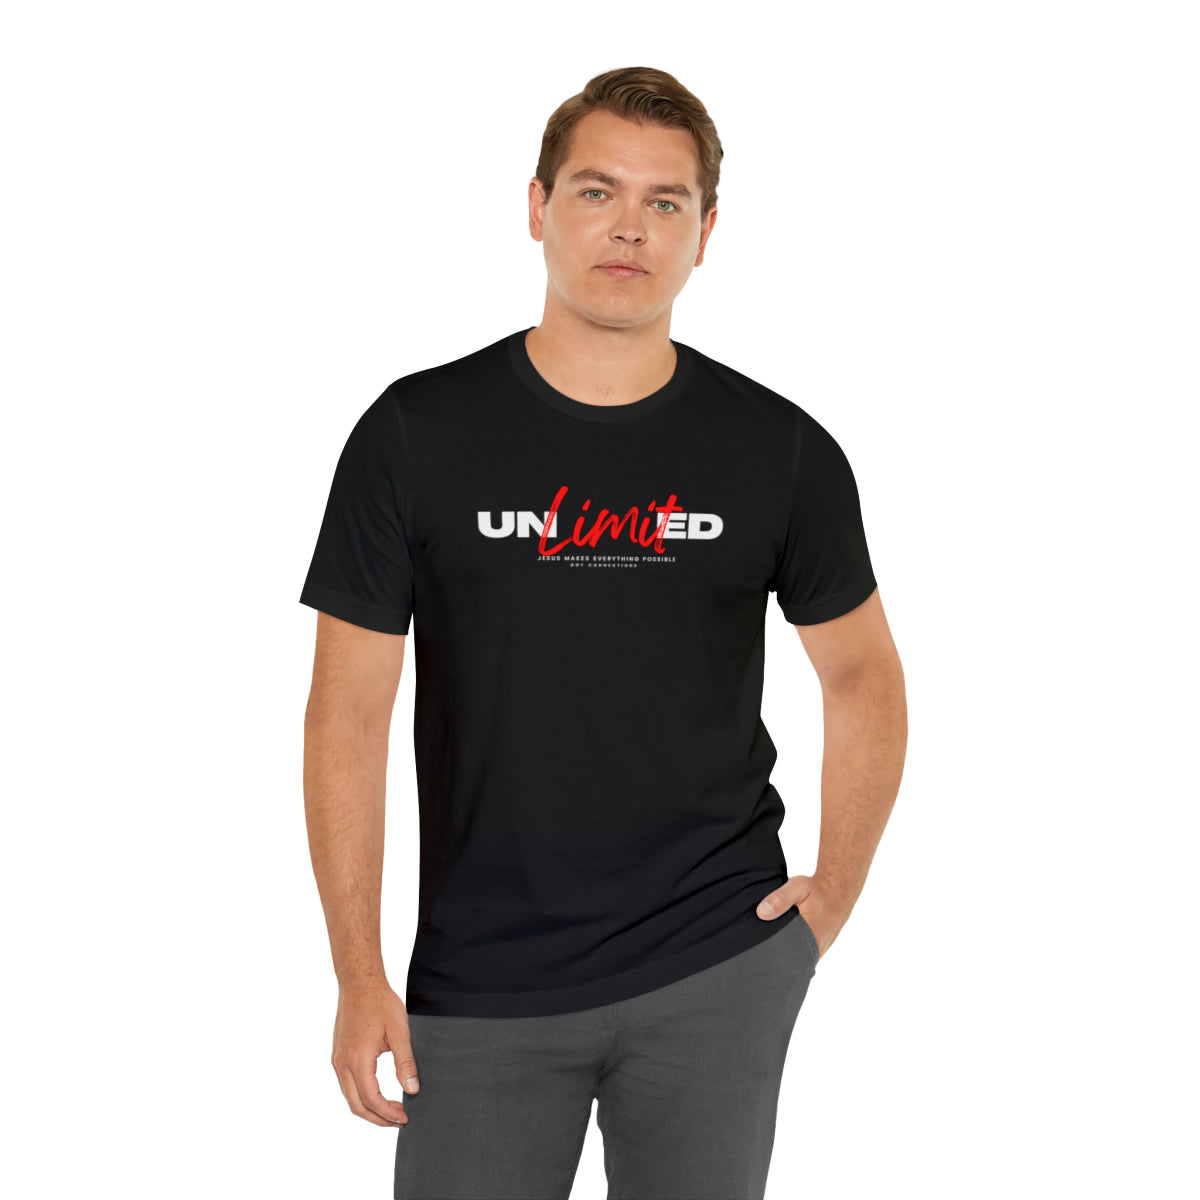 Unlimited - All Things Are Possible Premium T-Shirt